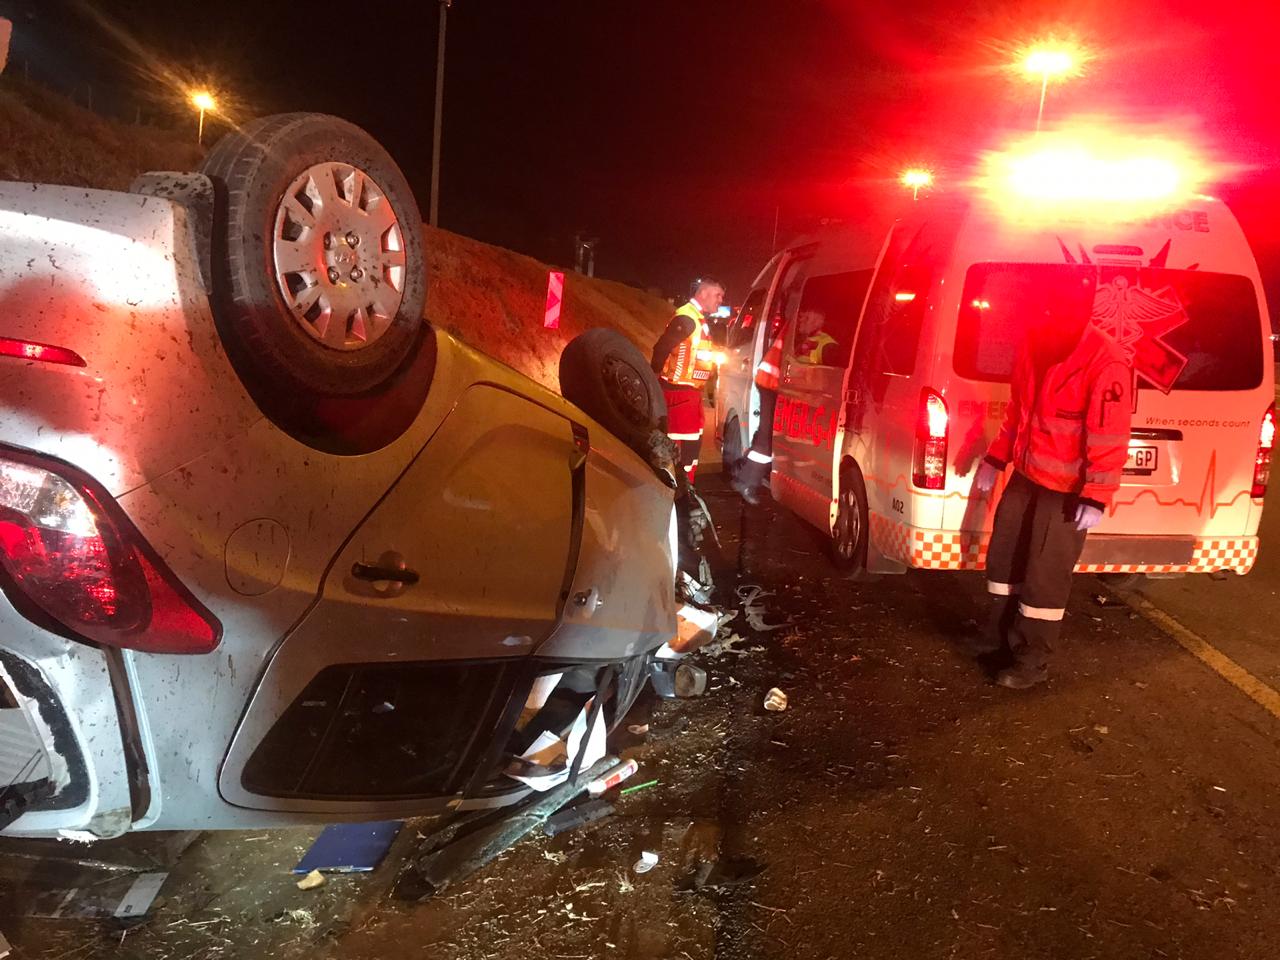 One injured in rollover on the N1, Randburg